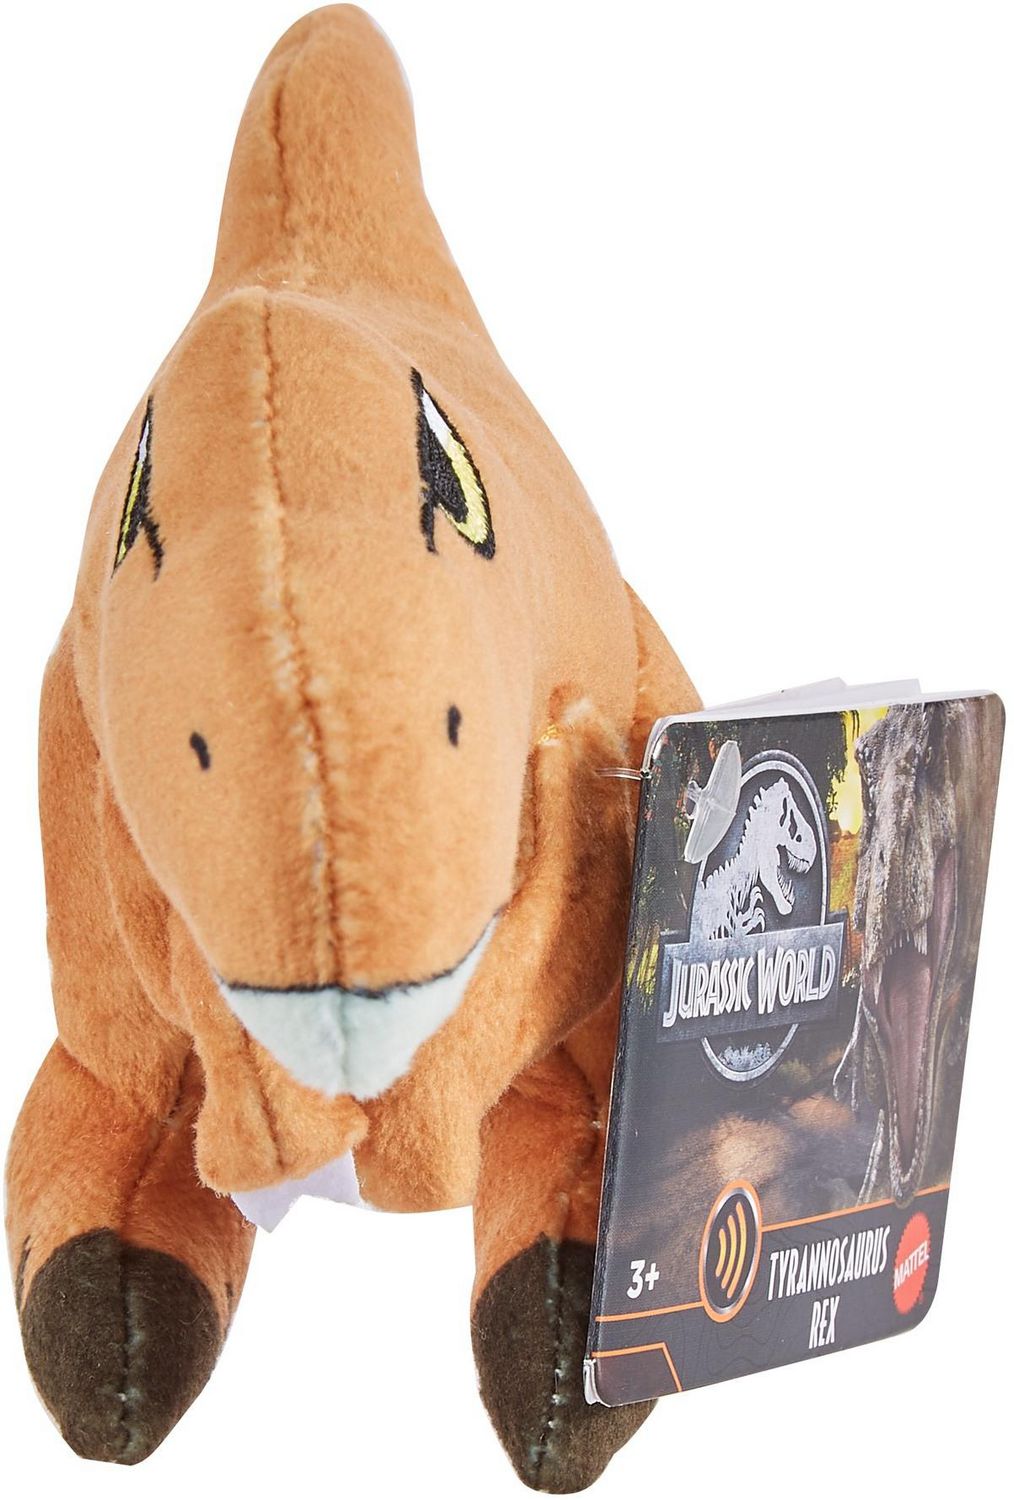 Jurassic World: Dominion Mini Plush 5 in Soft Dinosaur Toys with Sound,  Ages 3 Years & Up